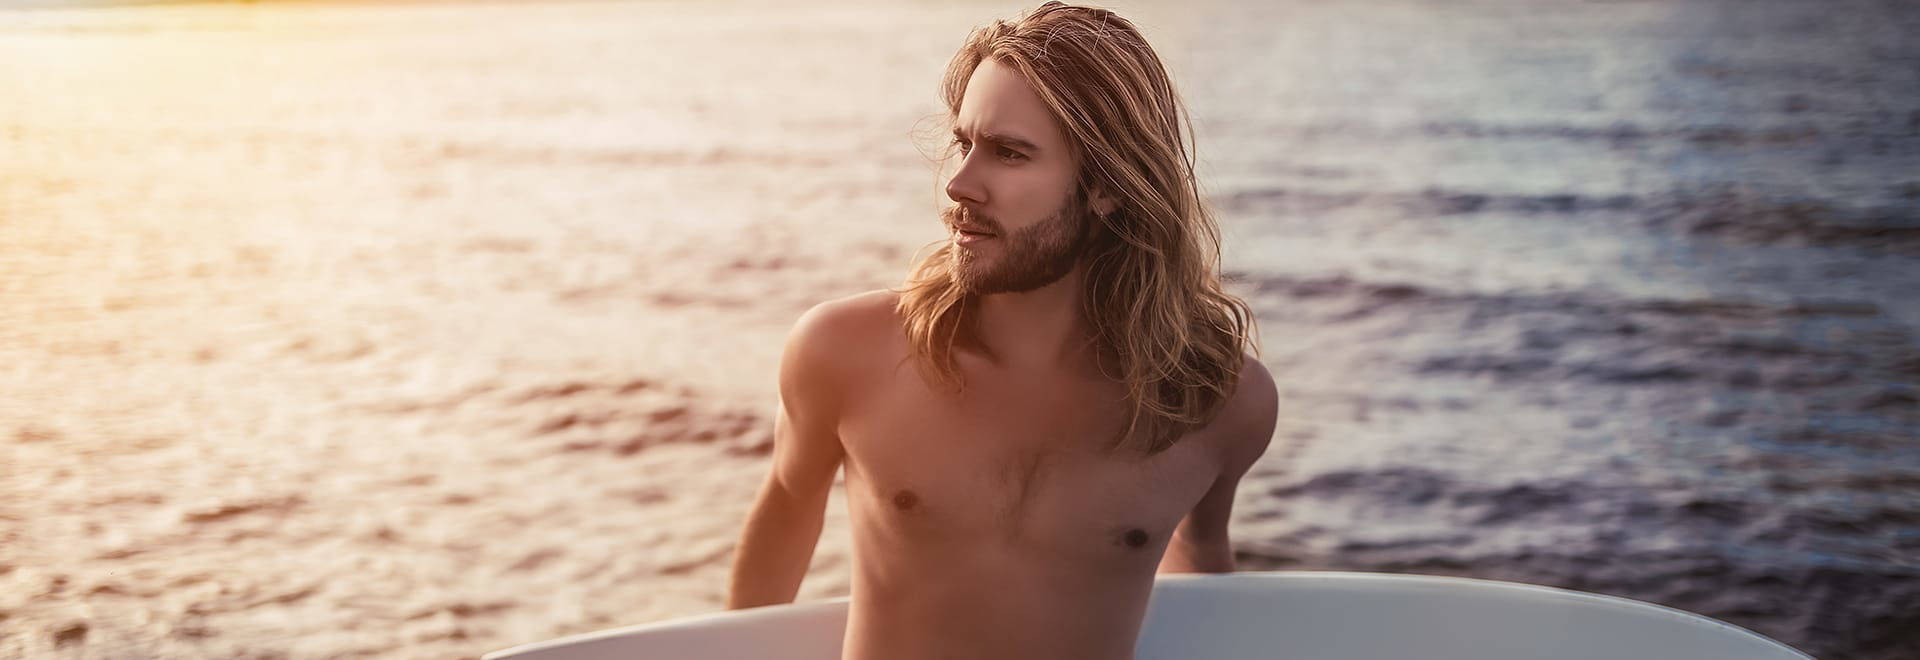 A photo of a man with long blonde hair holding a surfboard on the beach 